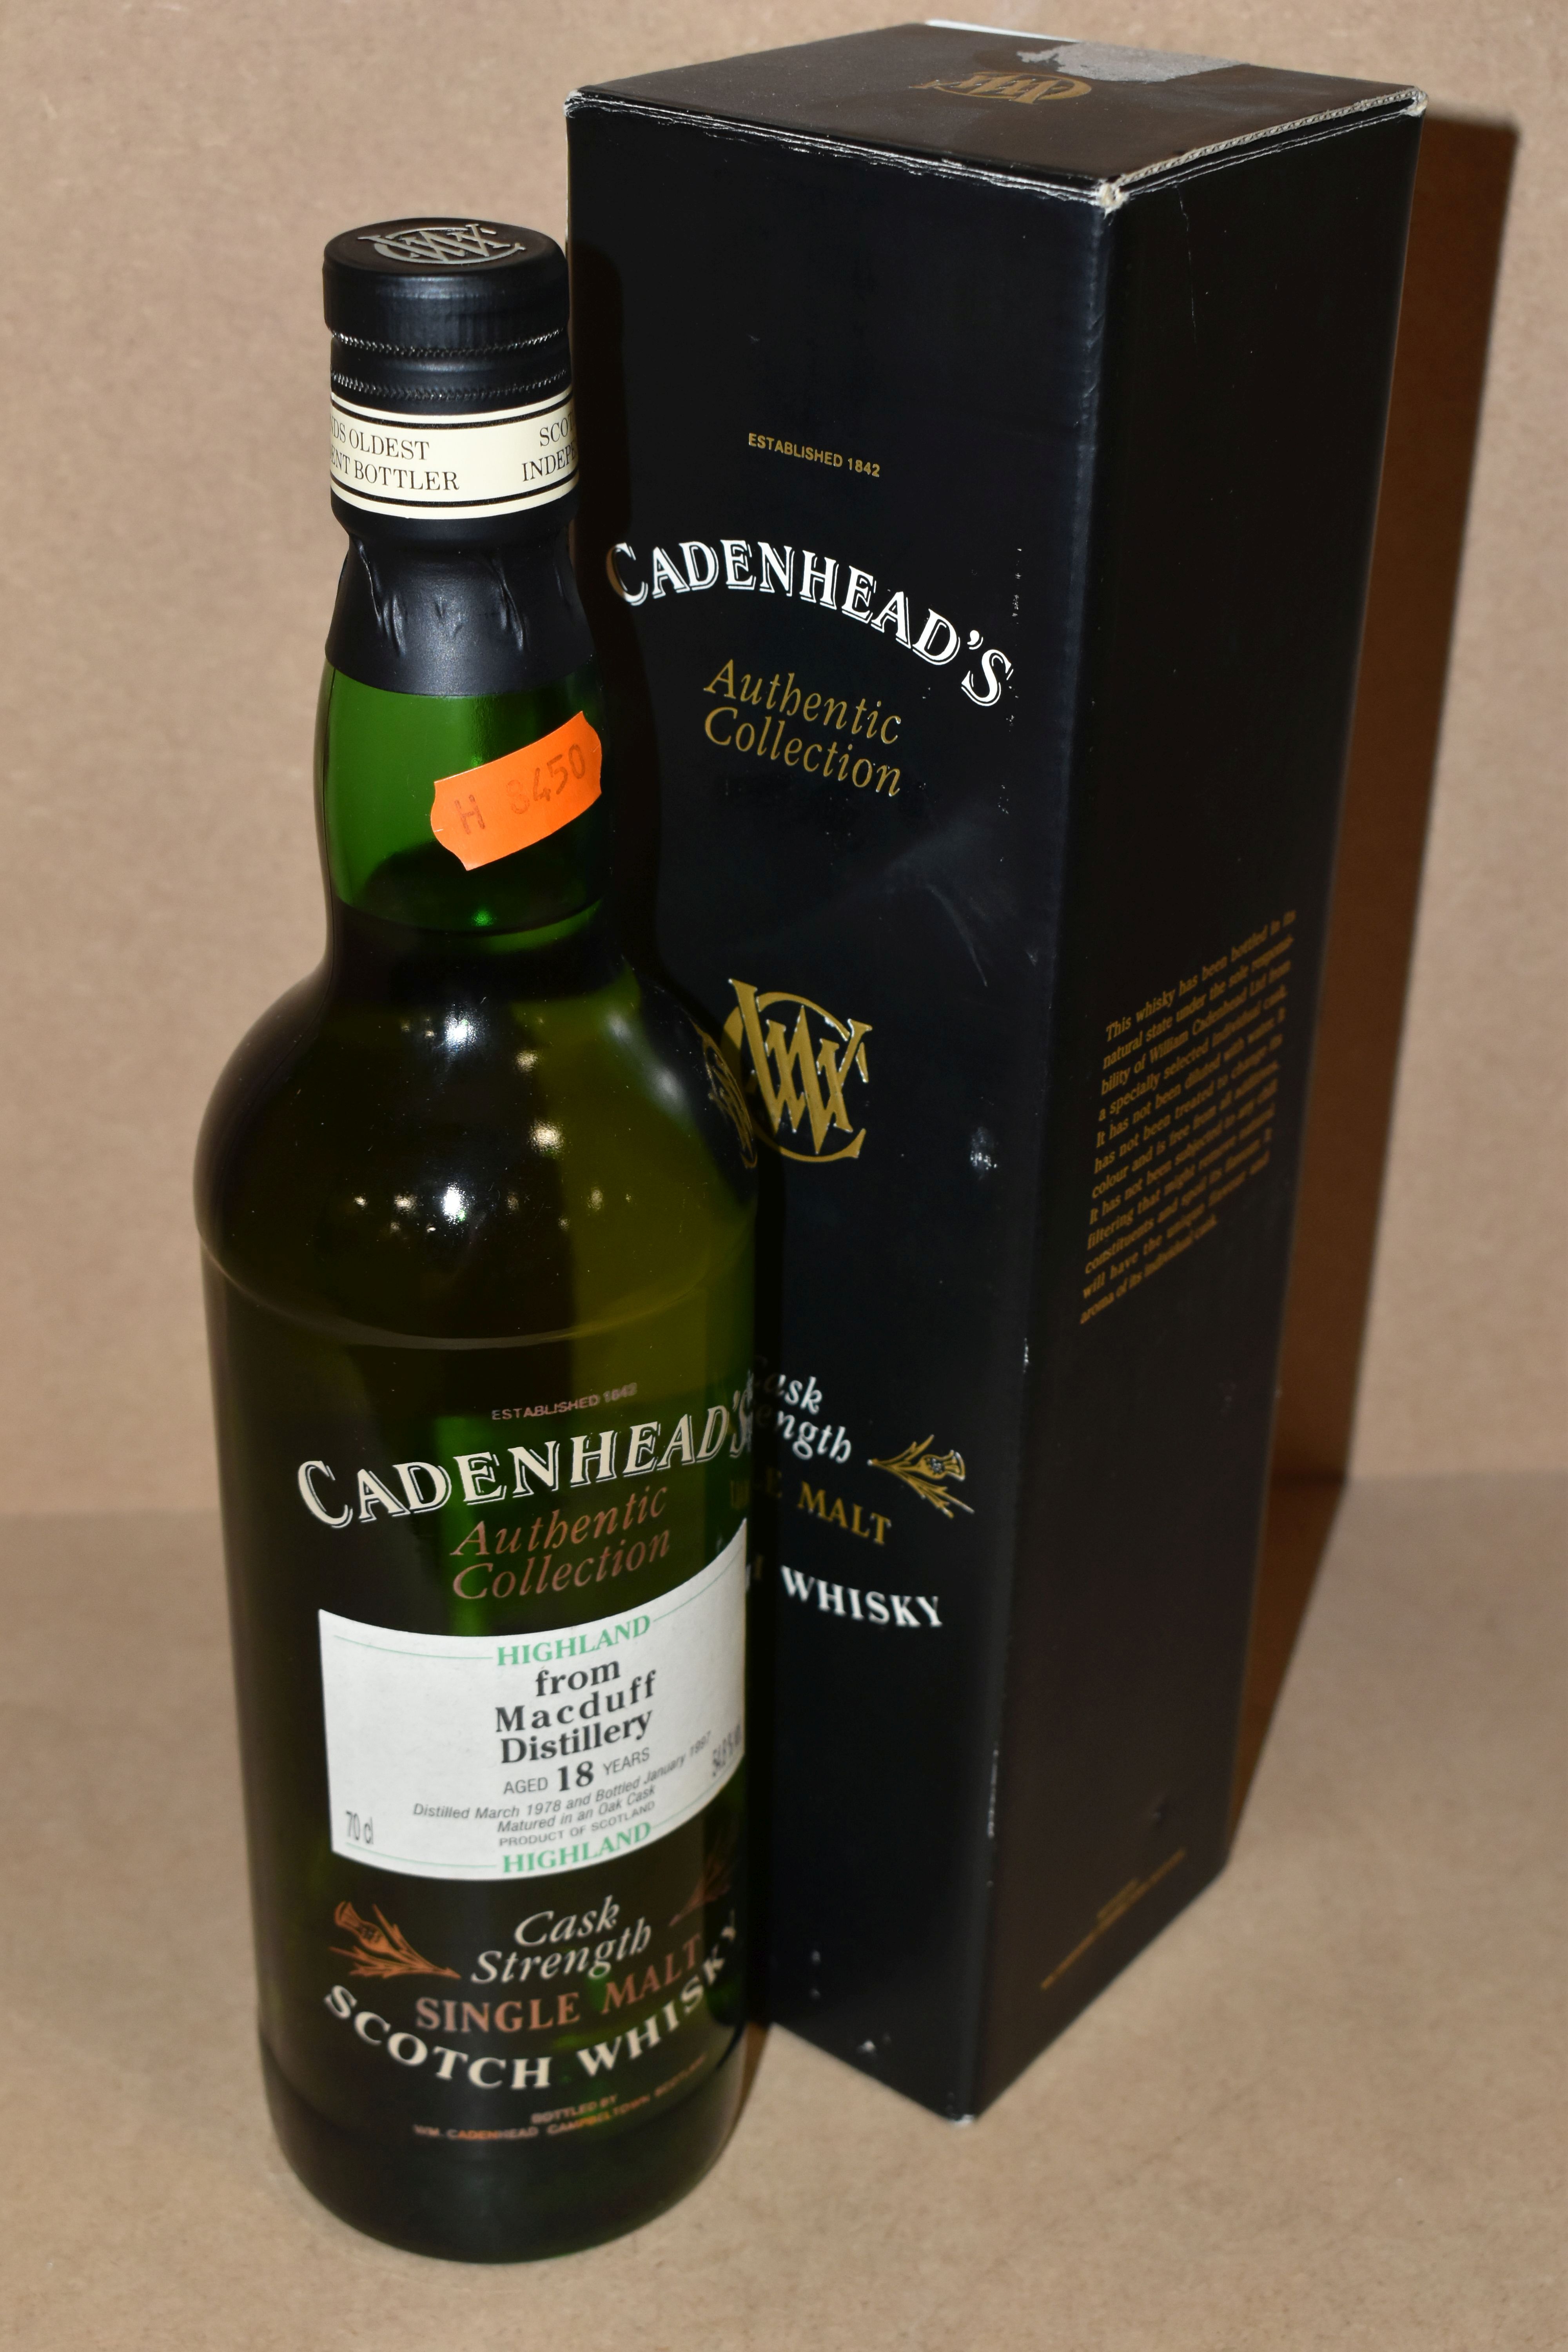 SINGLE MALT, One Bottle from Cadenhead's Authentic Collection from The MACDUFF DISTILLERY, aged 18 - Image 3 of 4